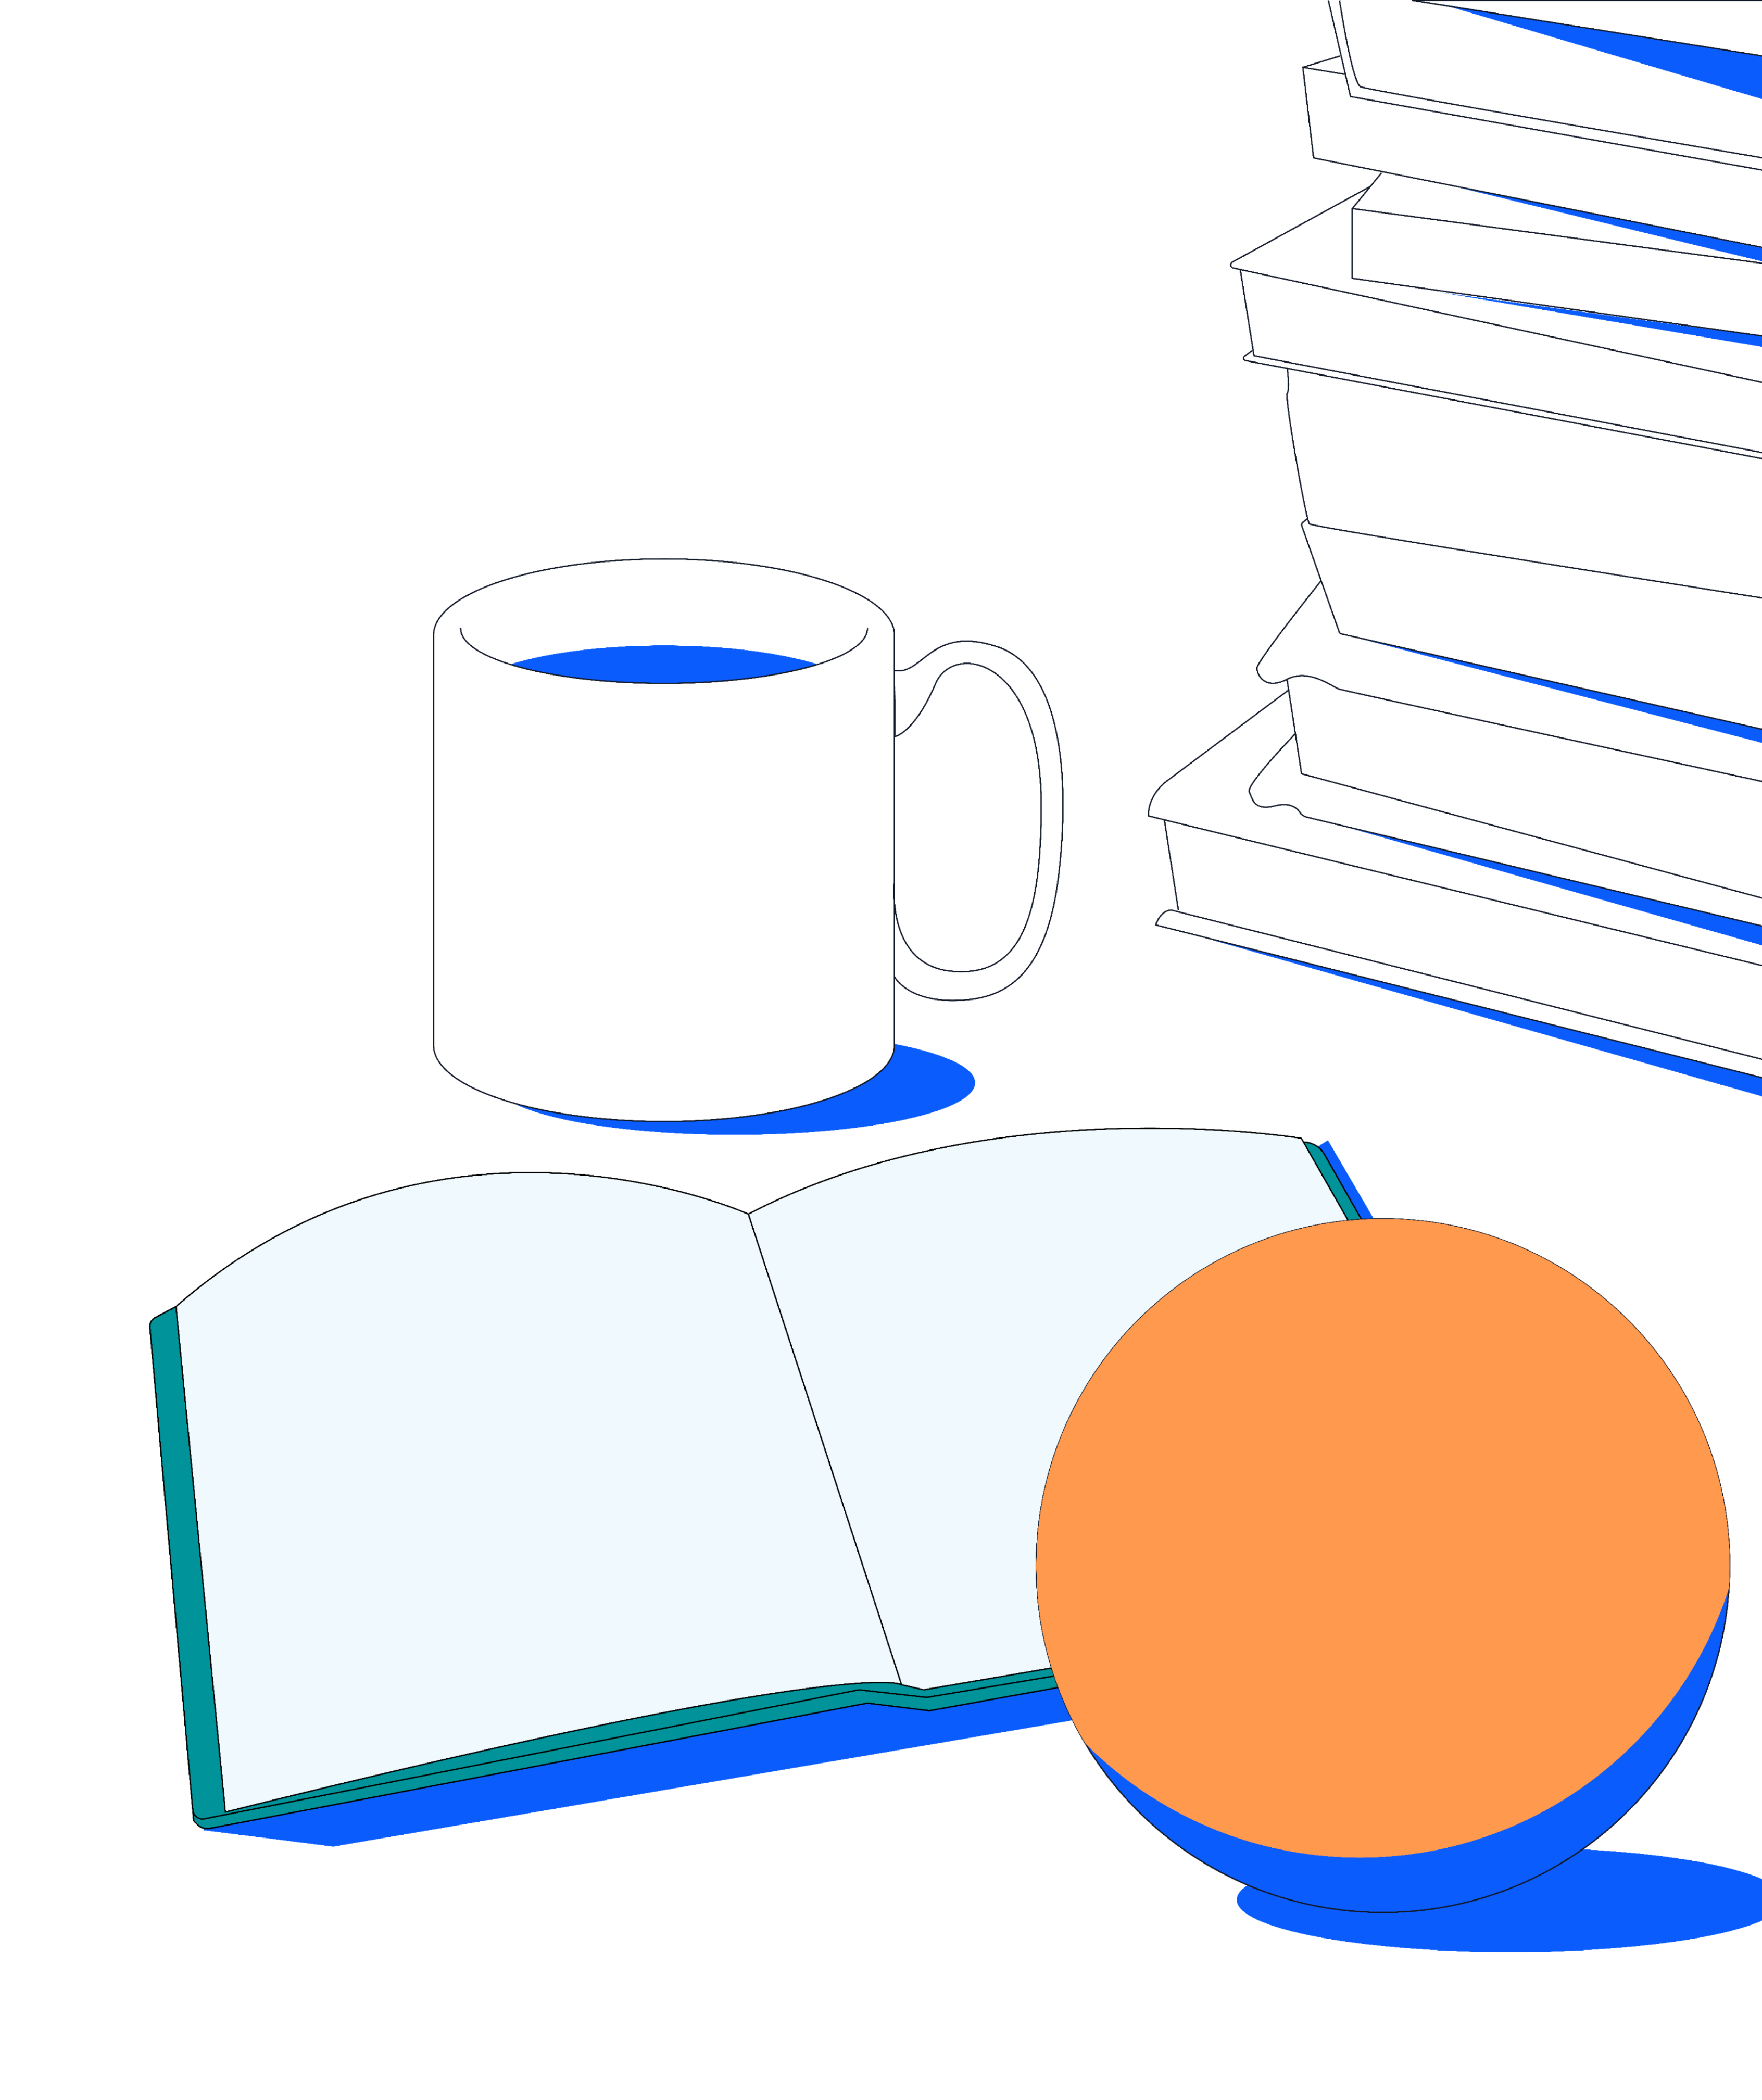 An open book sits beside stack of UX books, an orange ball and coffee cup